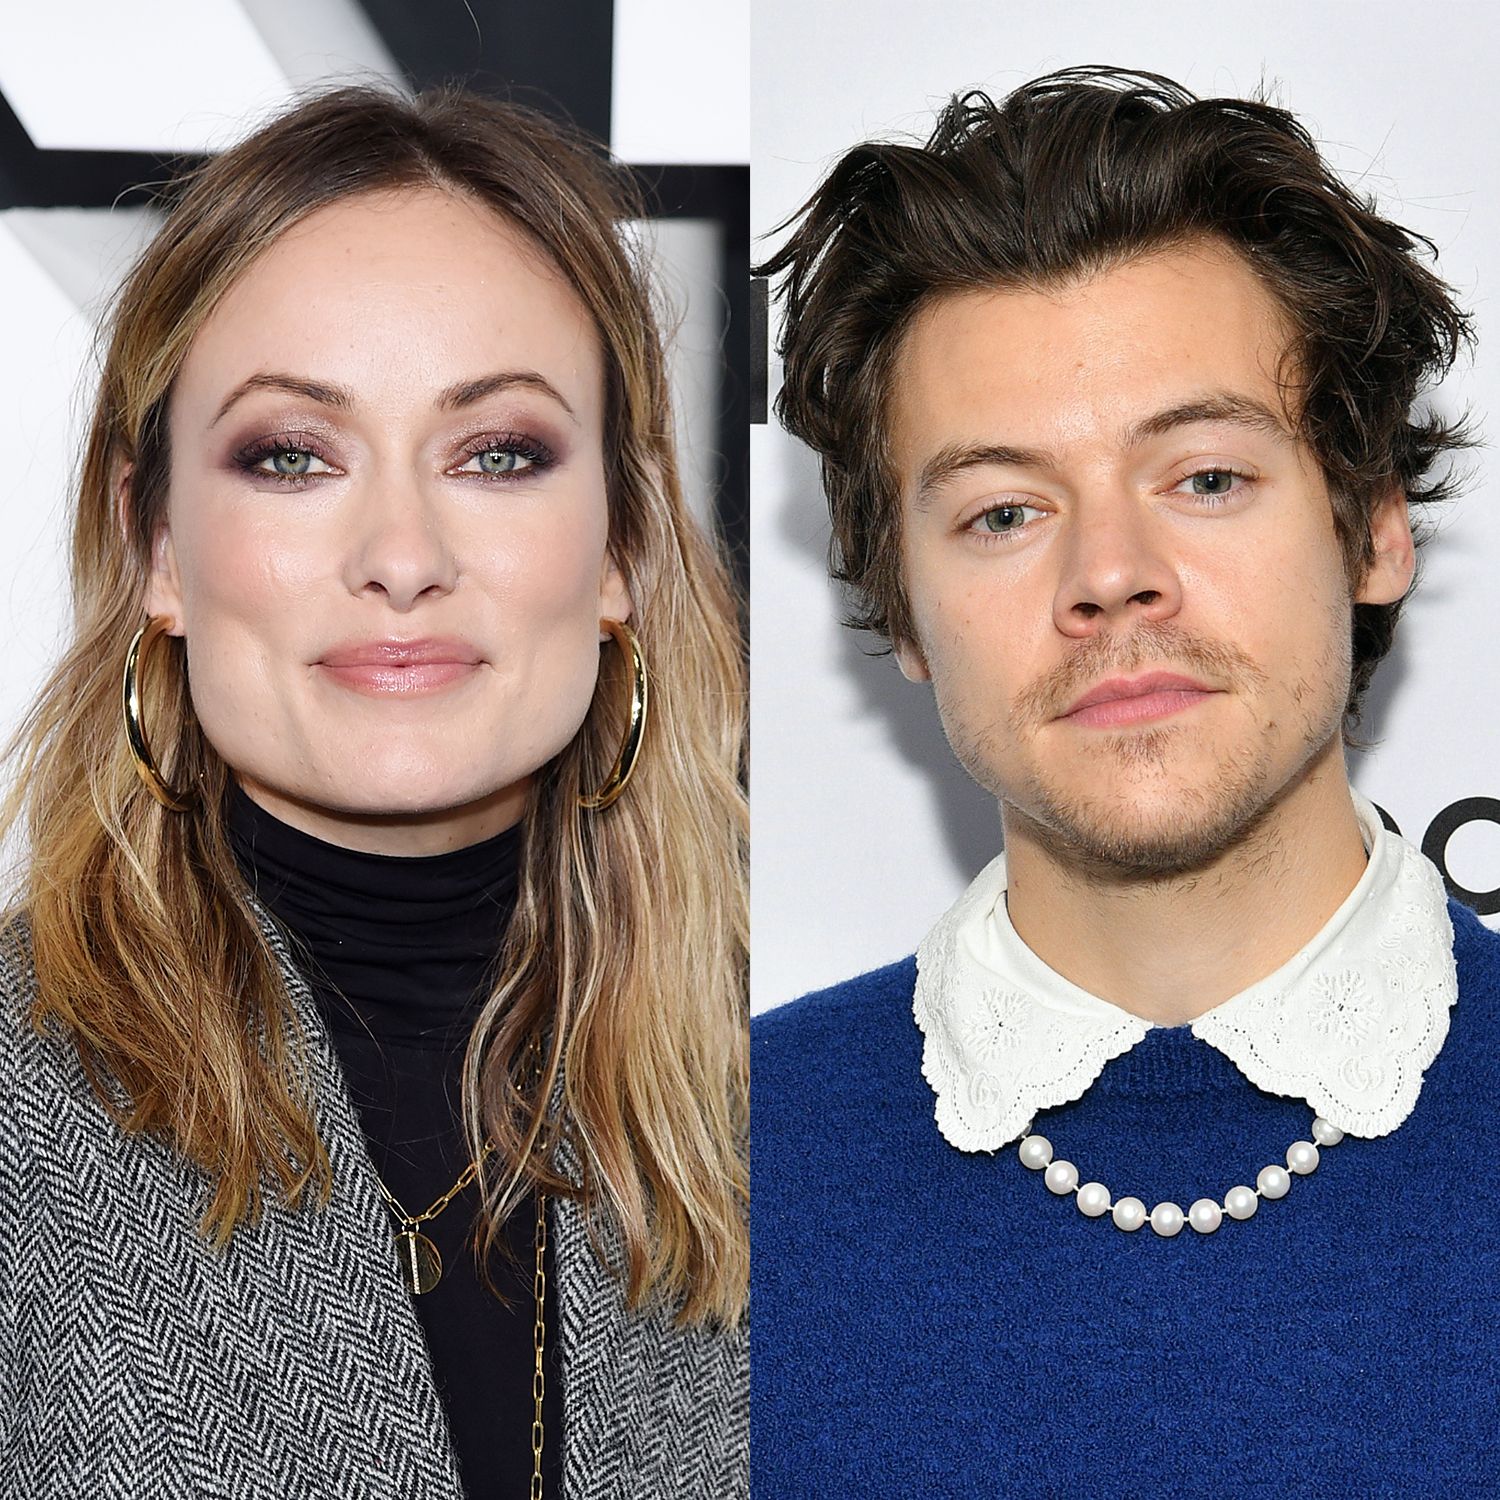 Olivia Wilde and Harry Styles Have Talked About Getting Engaged